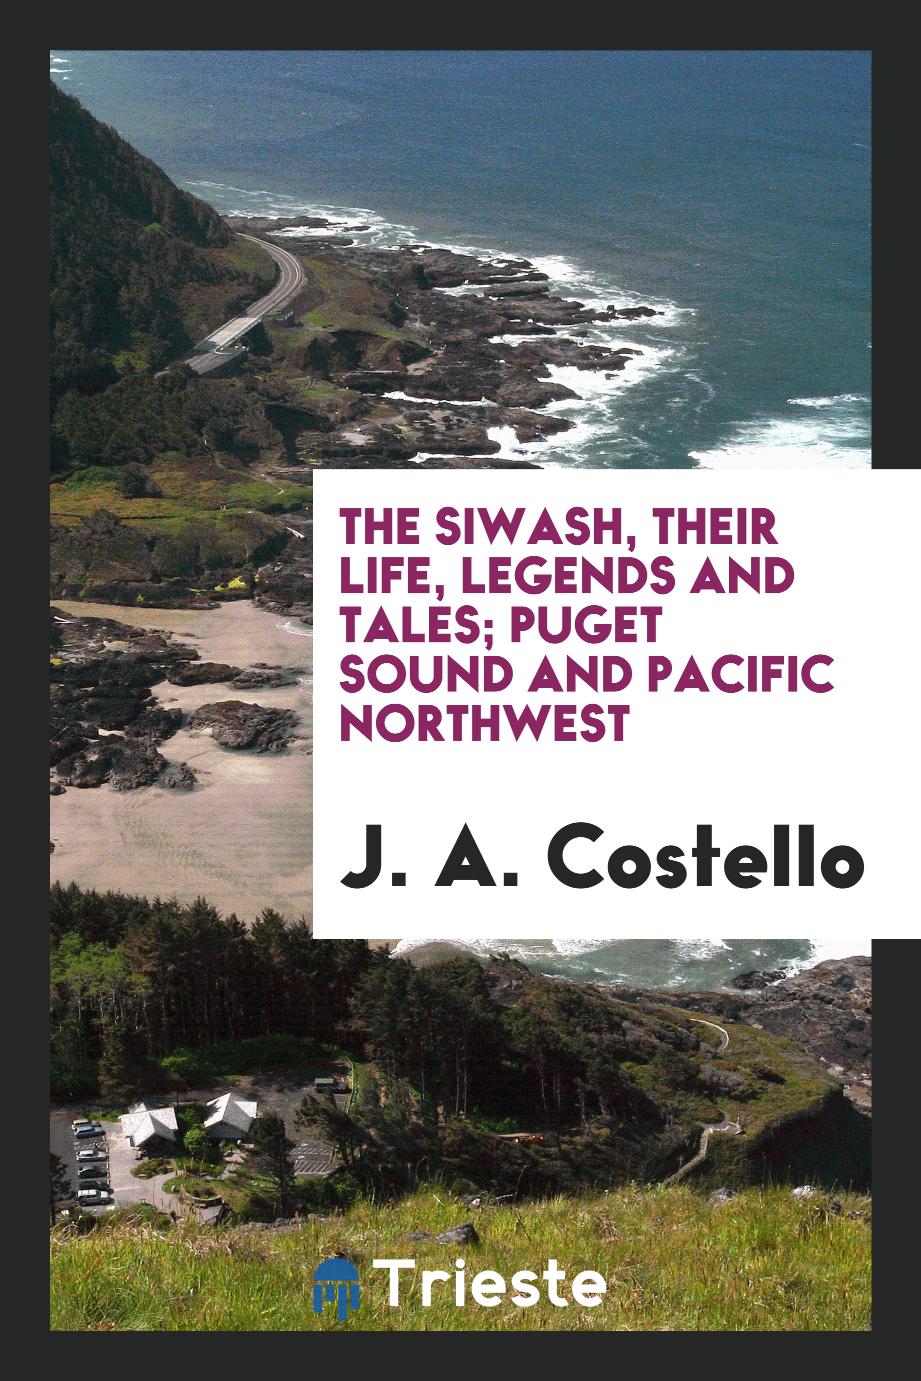 The Siwash, their life, legends and tales; Puget Sound and Pacific Northwest